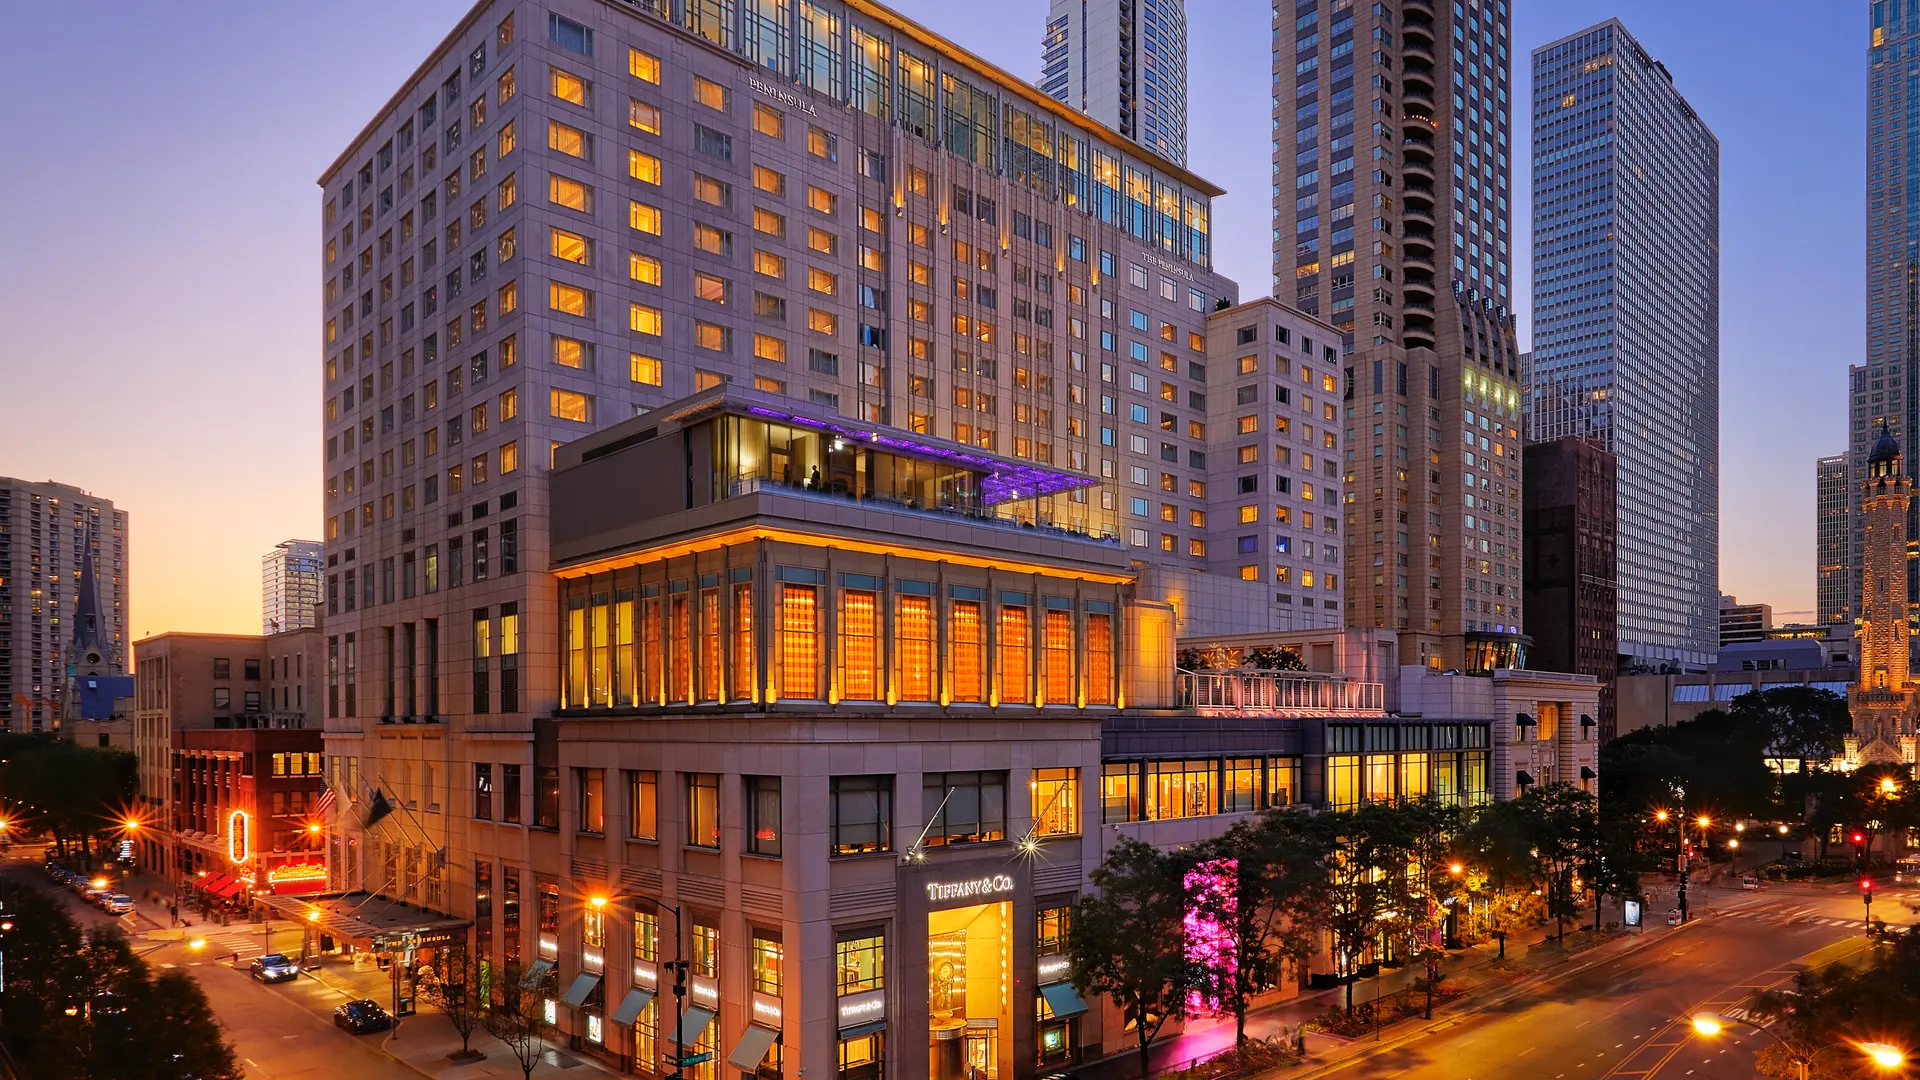 Hotel review Location' - The Peninsula Chicago - 0